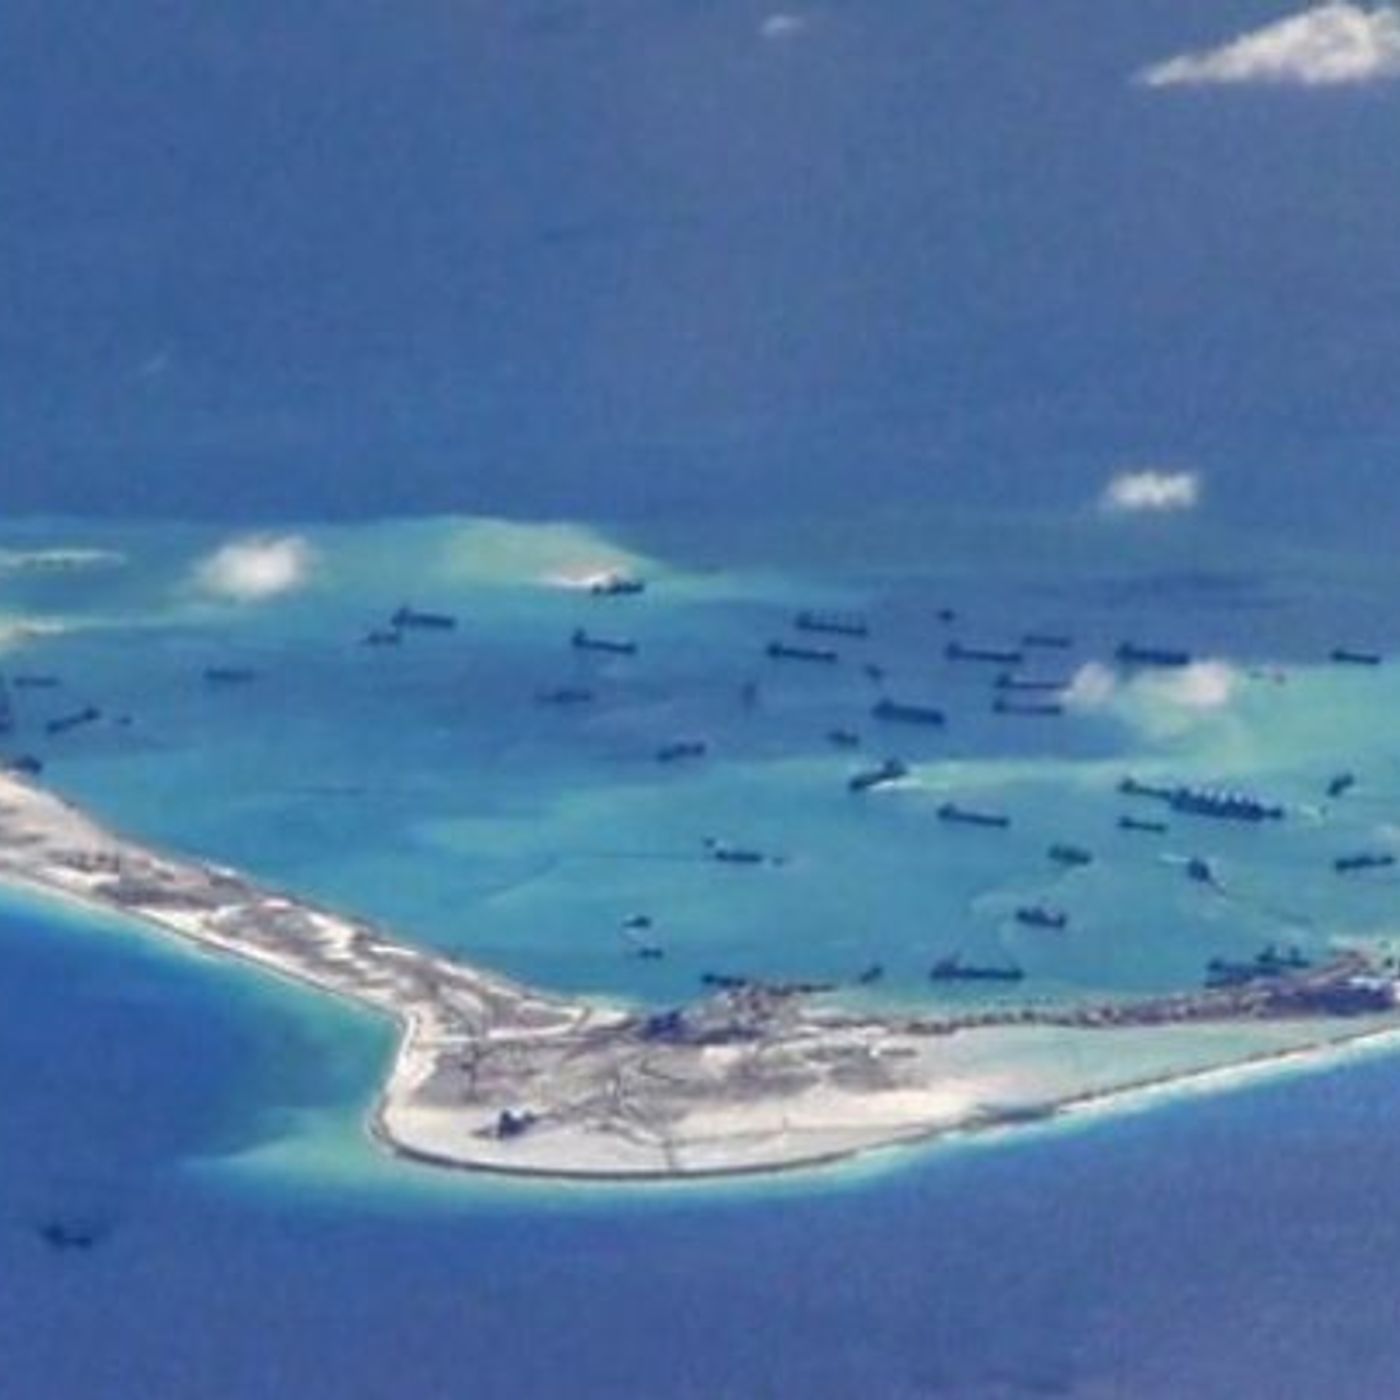 Episode 495: Countering China in the South China Sea with Hunter Stires